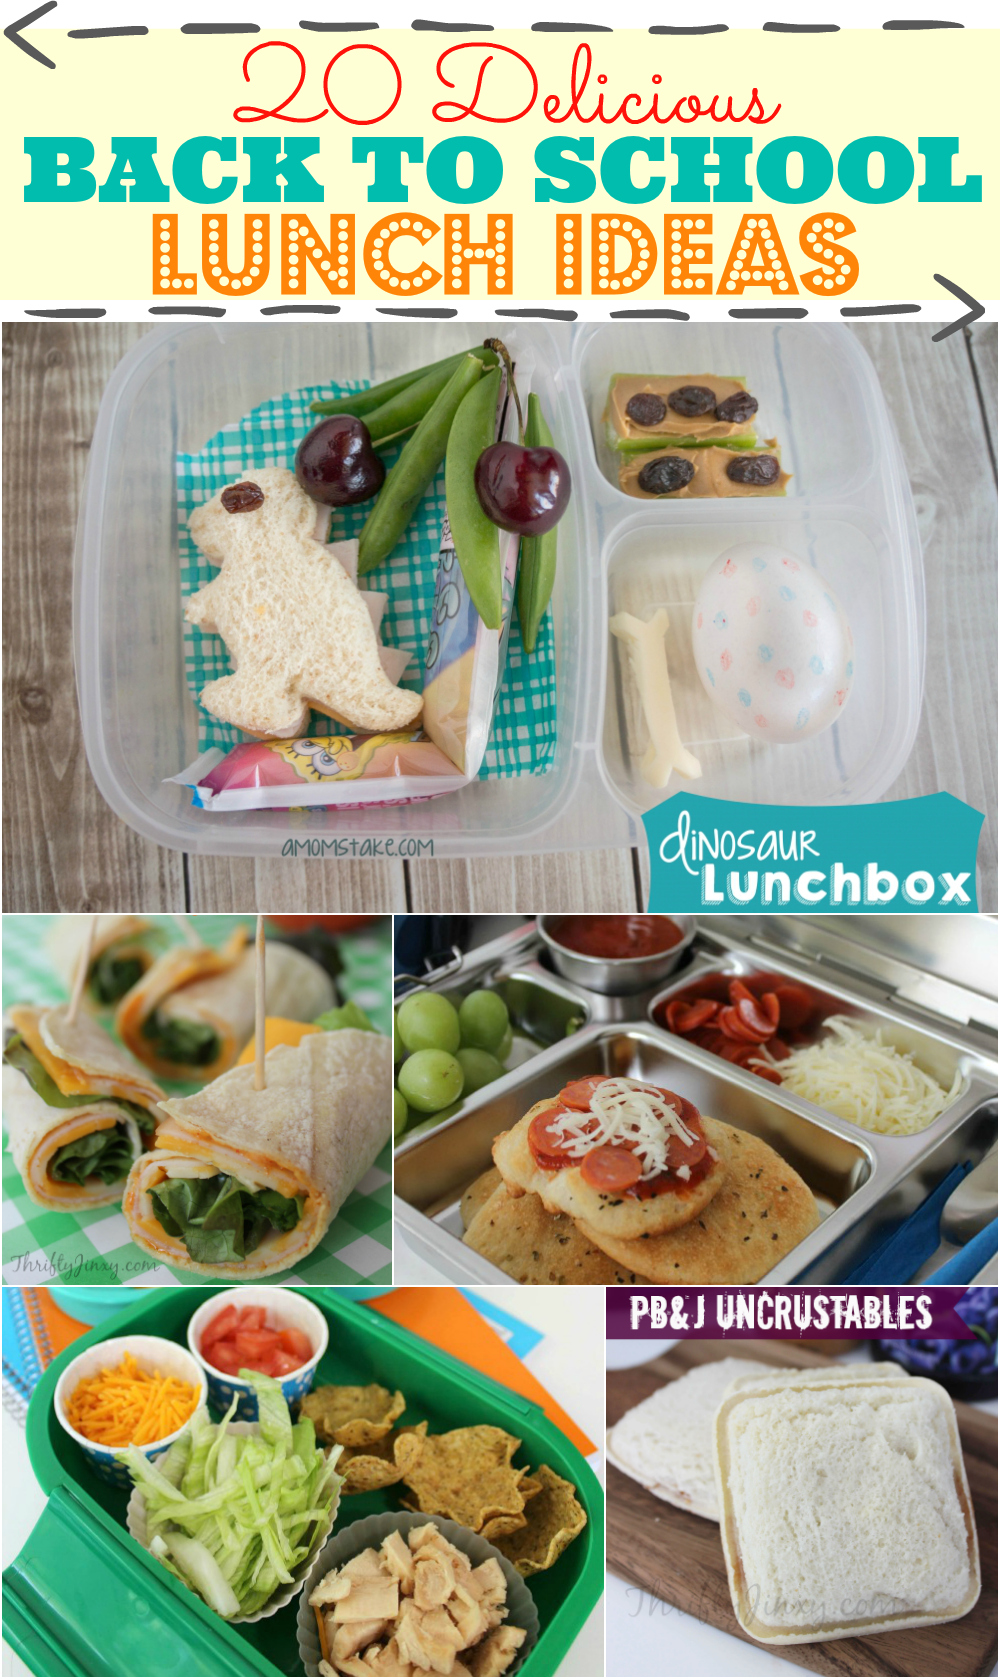 Lunch Ideas- 20 Delicious Back to School Lunch Ideas!